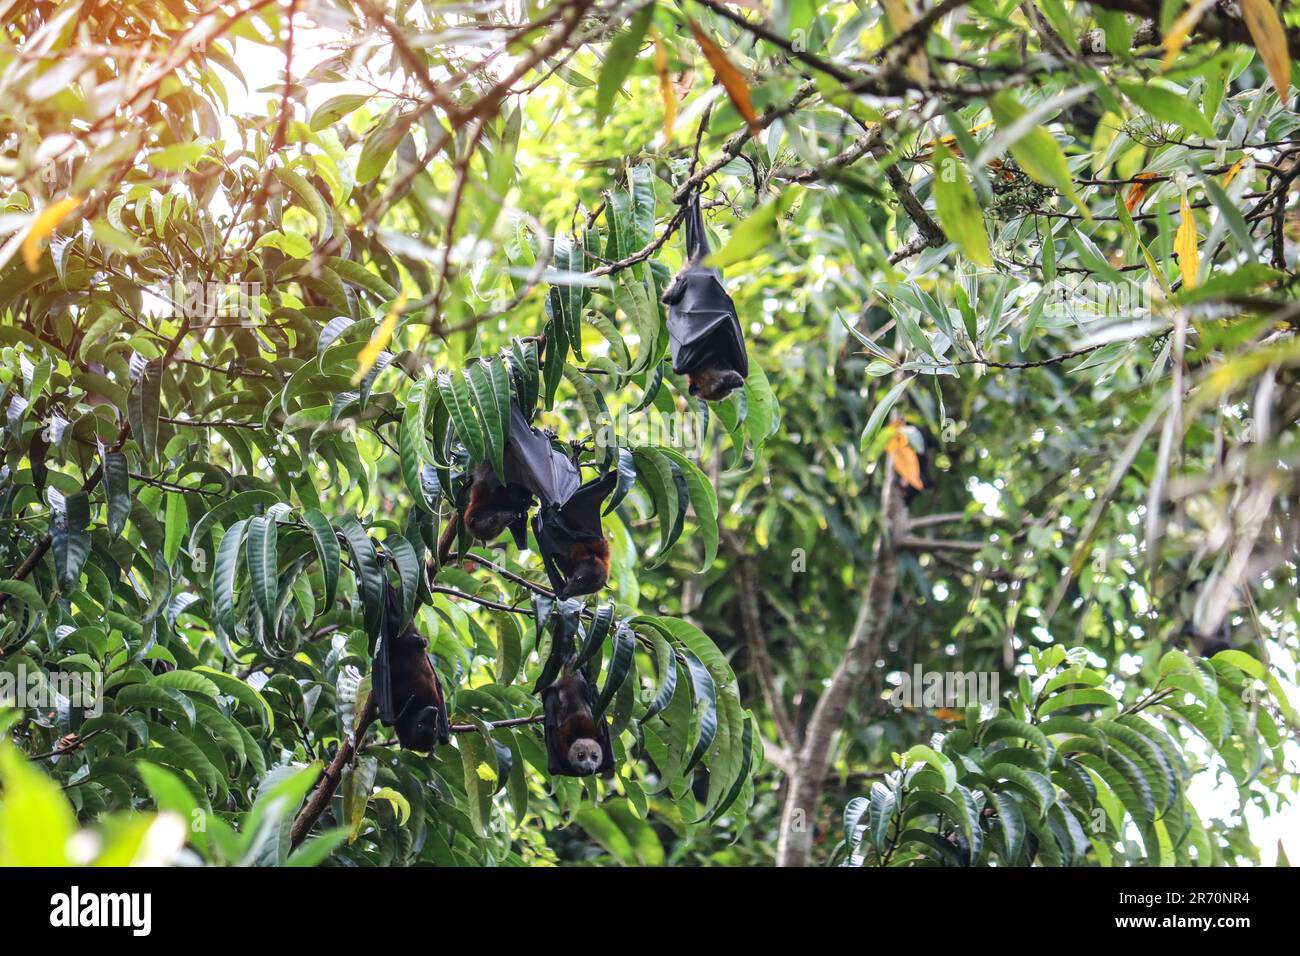 Fruit bats hang upside down from tree branches, rest before foraging. Flying foxes (Pteropus). Stock Photo